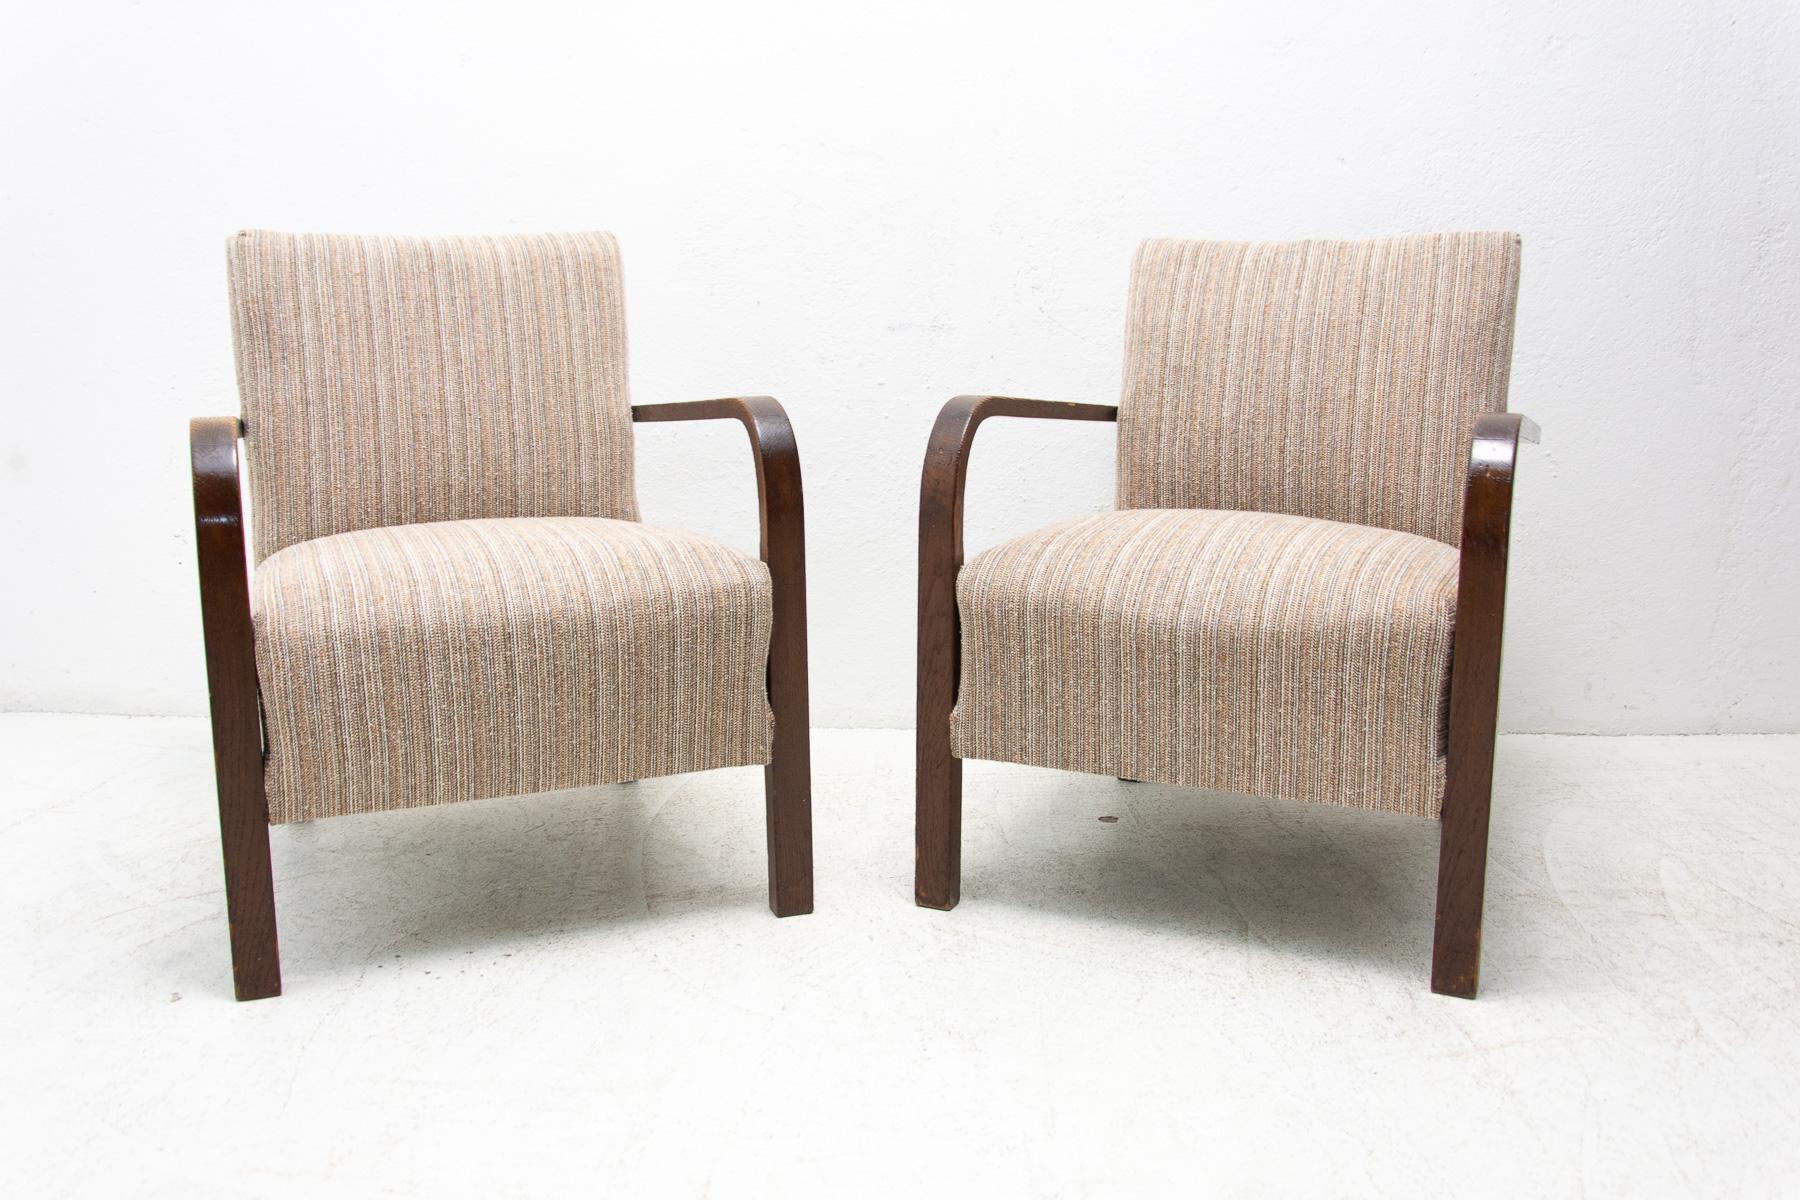 These ART DECO bentwood armchairs were made in the former Czechoslovakia in the 1930’s.  Made of beech wood. They are in very good condition, shows slight signs of age and using.

 

Price is for the pair.

Height: 76 cm

Width: 60 cm

Depth: 62